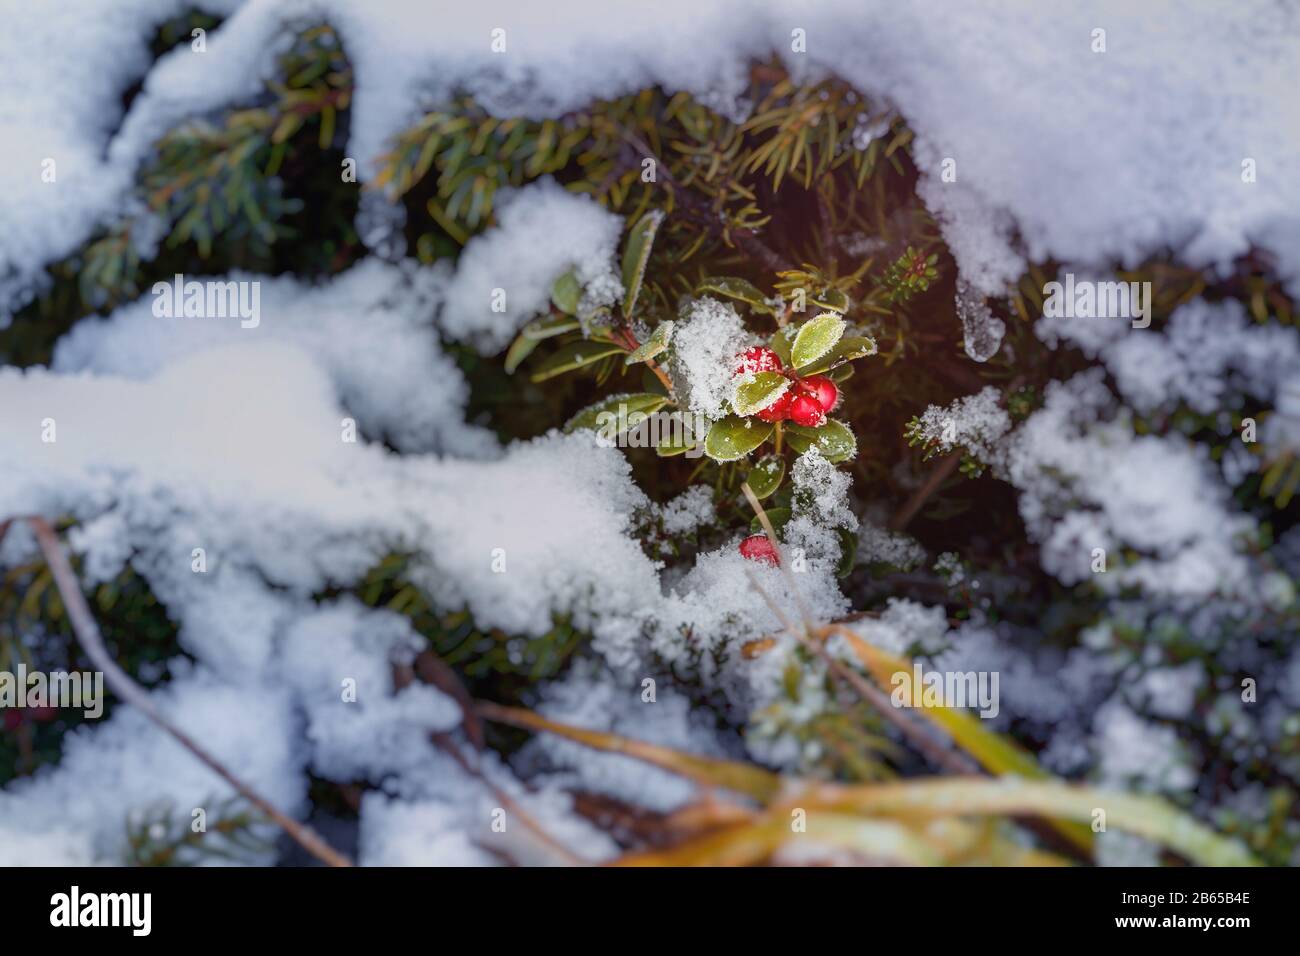 Cranberry in winter, plant covered with snow and ice Stock Photo